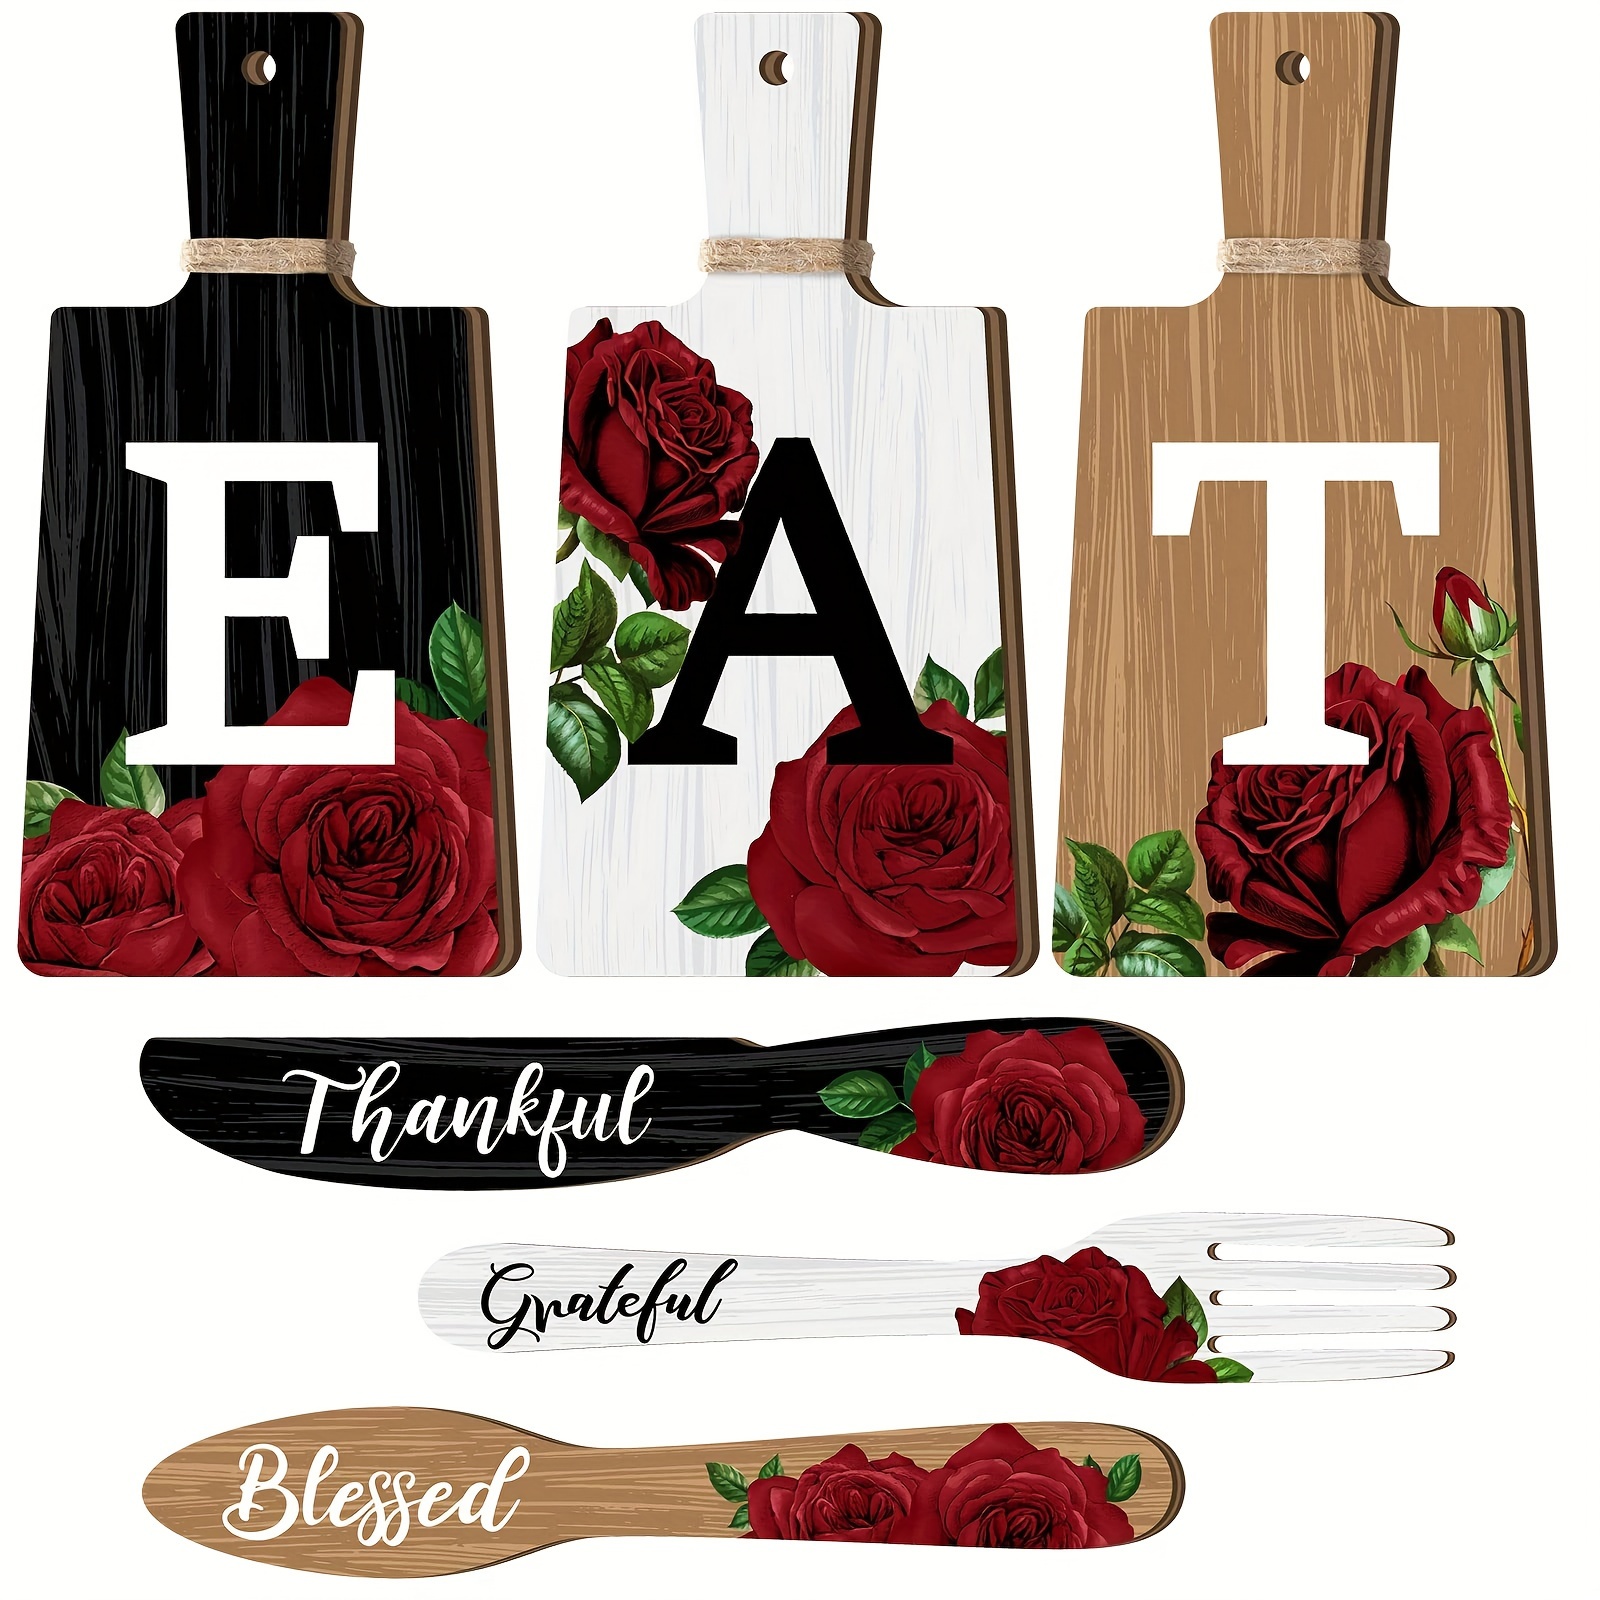 

6pcs, Cutting Board Kitchen Decor Red Rose Eat Sign Set Wooden Kitchen Knife Fork Spoon With Thankful Grateful Blessed Hanging Sign Rustic Farmhouse Wedding Wall Art For Wedding Home Decoration